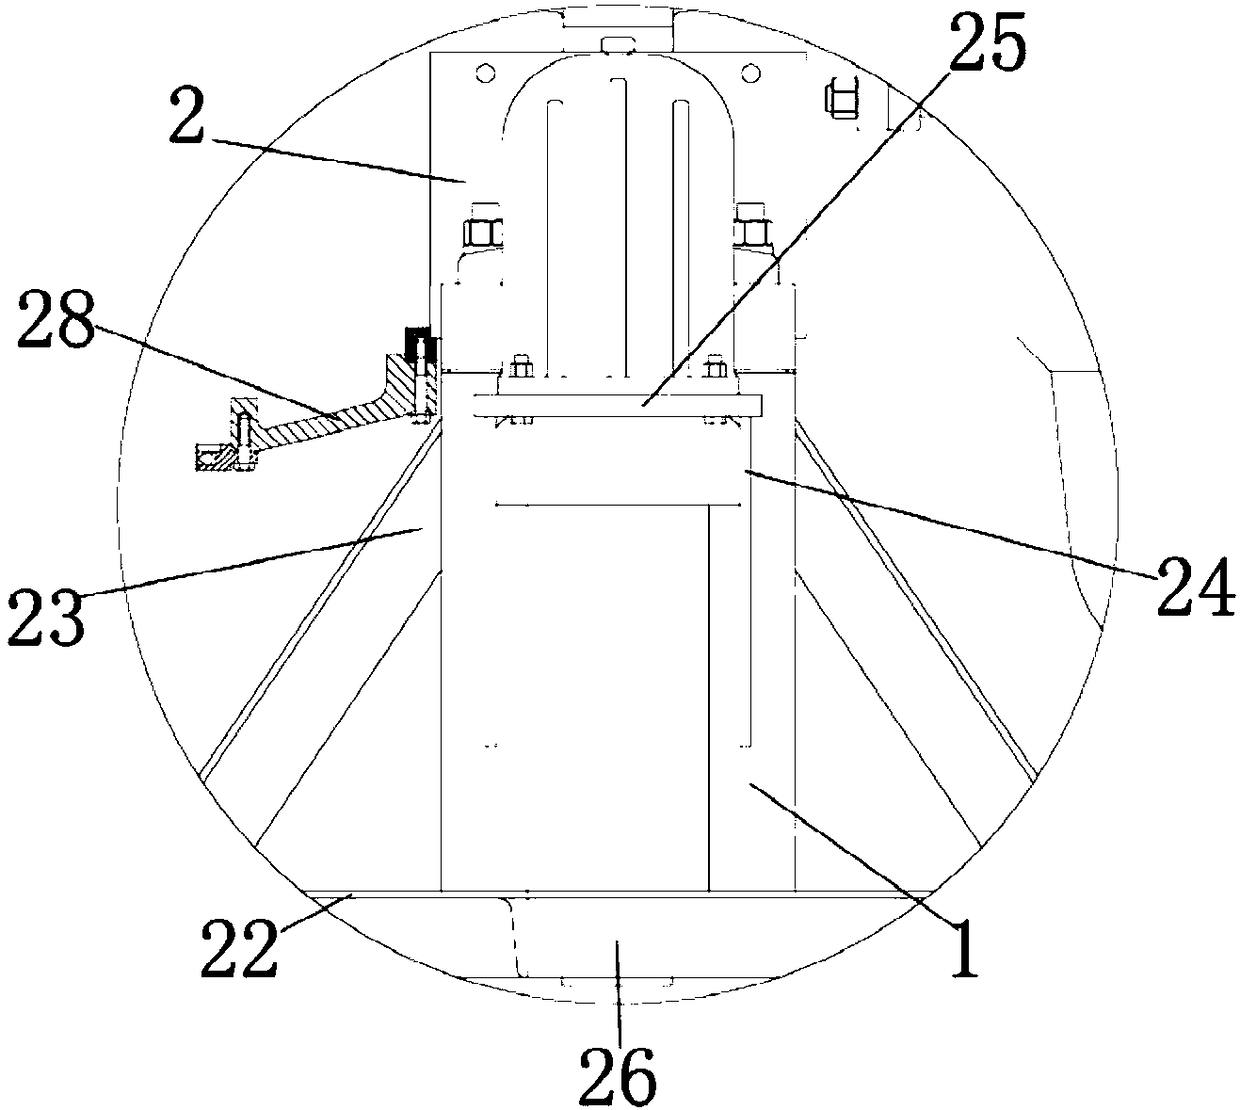 Overturning method for mechanically clamping long steel structural parts